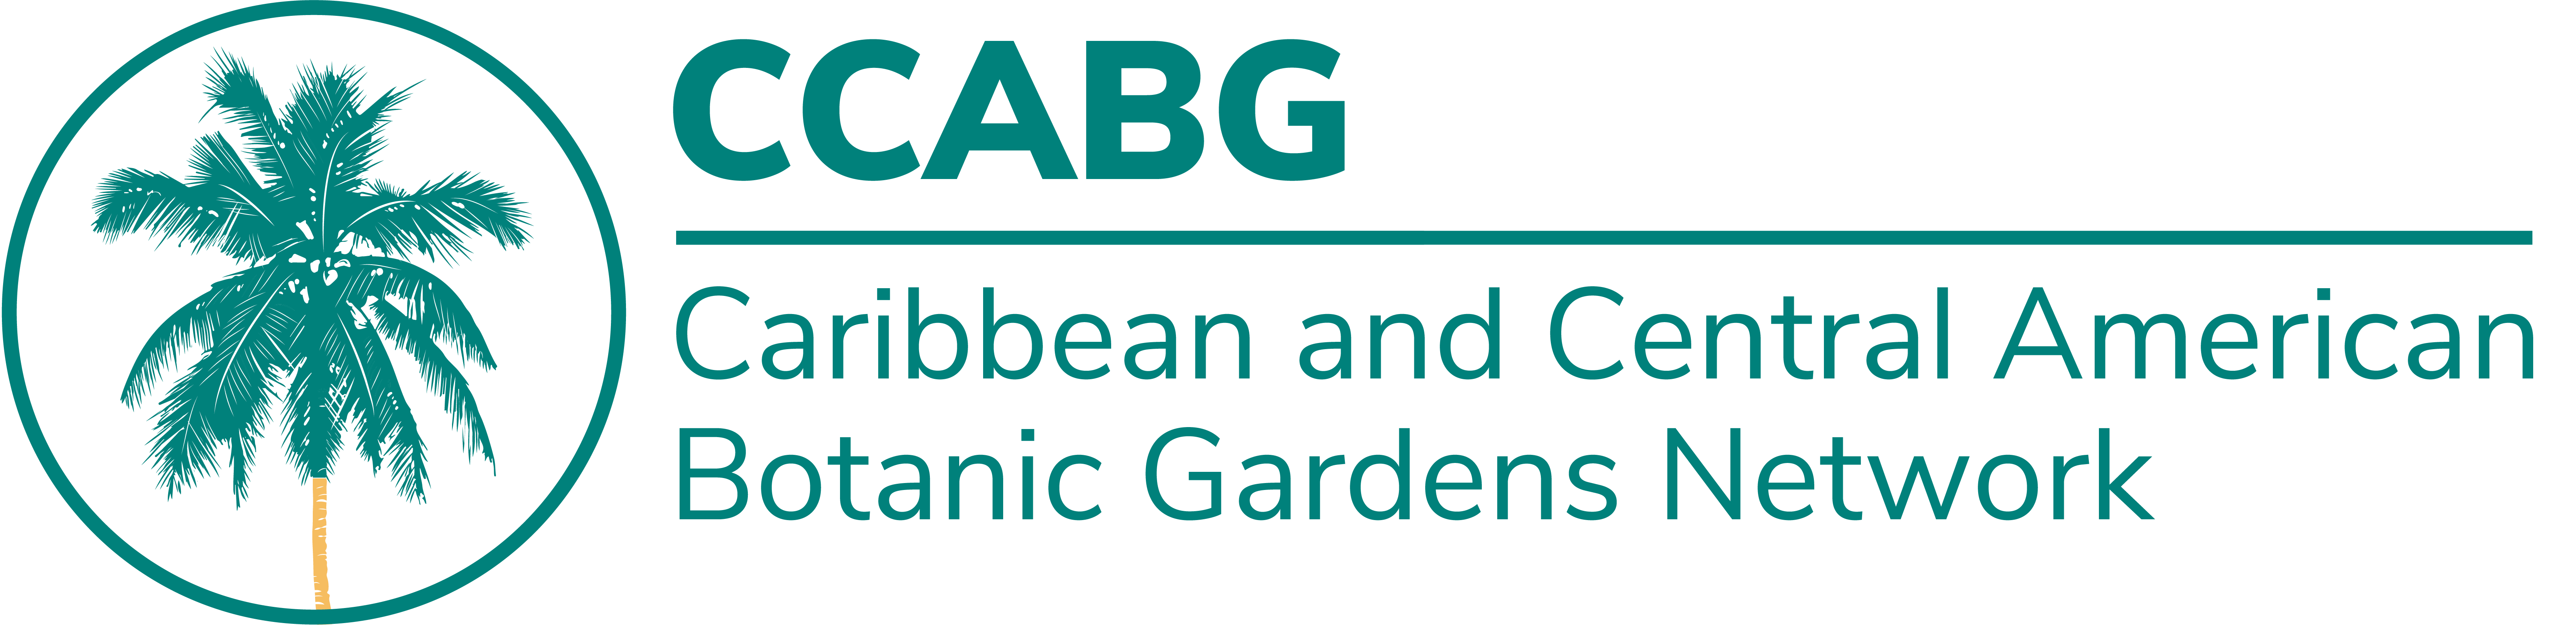 Caribbean and Central American Botanic Gardens Network